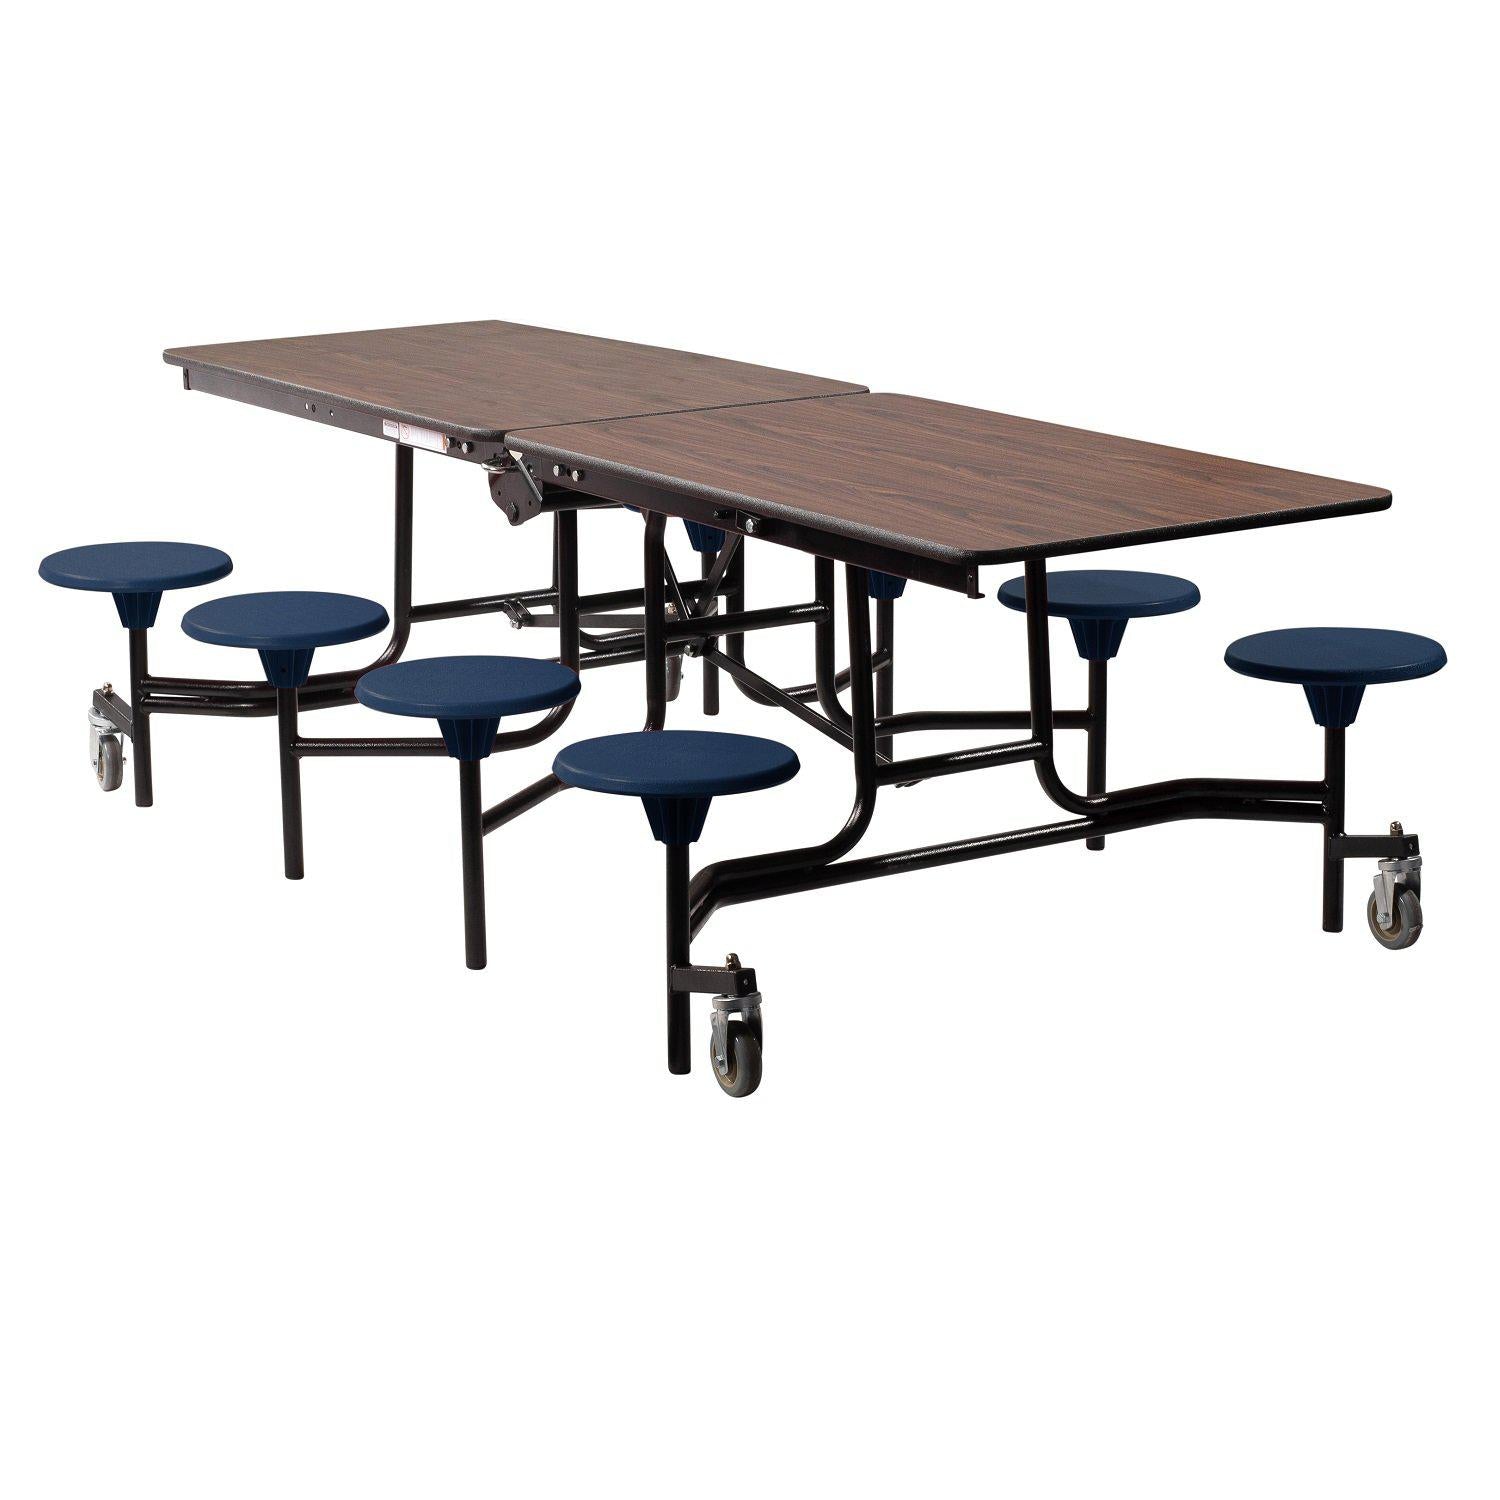 Mobile Cafeteria Table with 8 Stools, 8'L Rectangular, Particleboard Core, Vinyl T-Mold Edge, Textured Black Frame